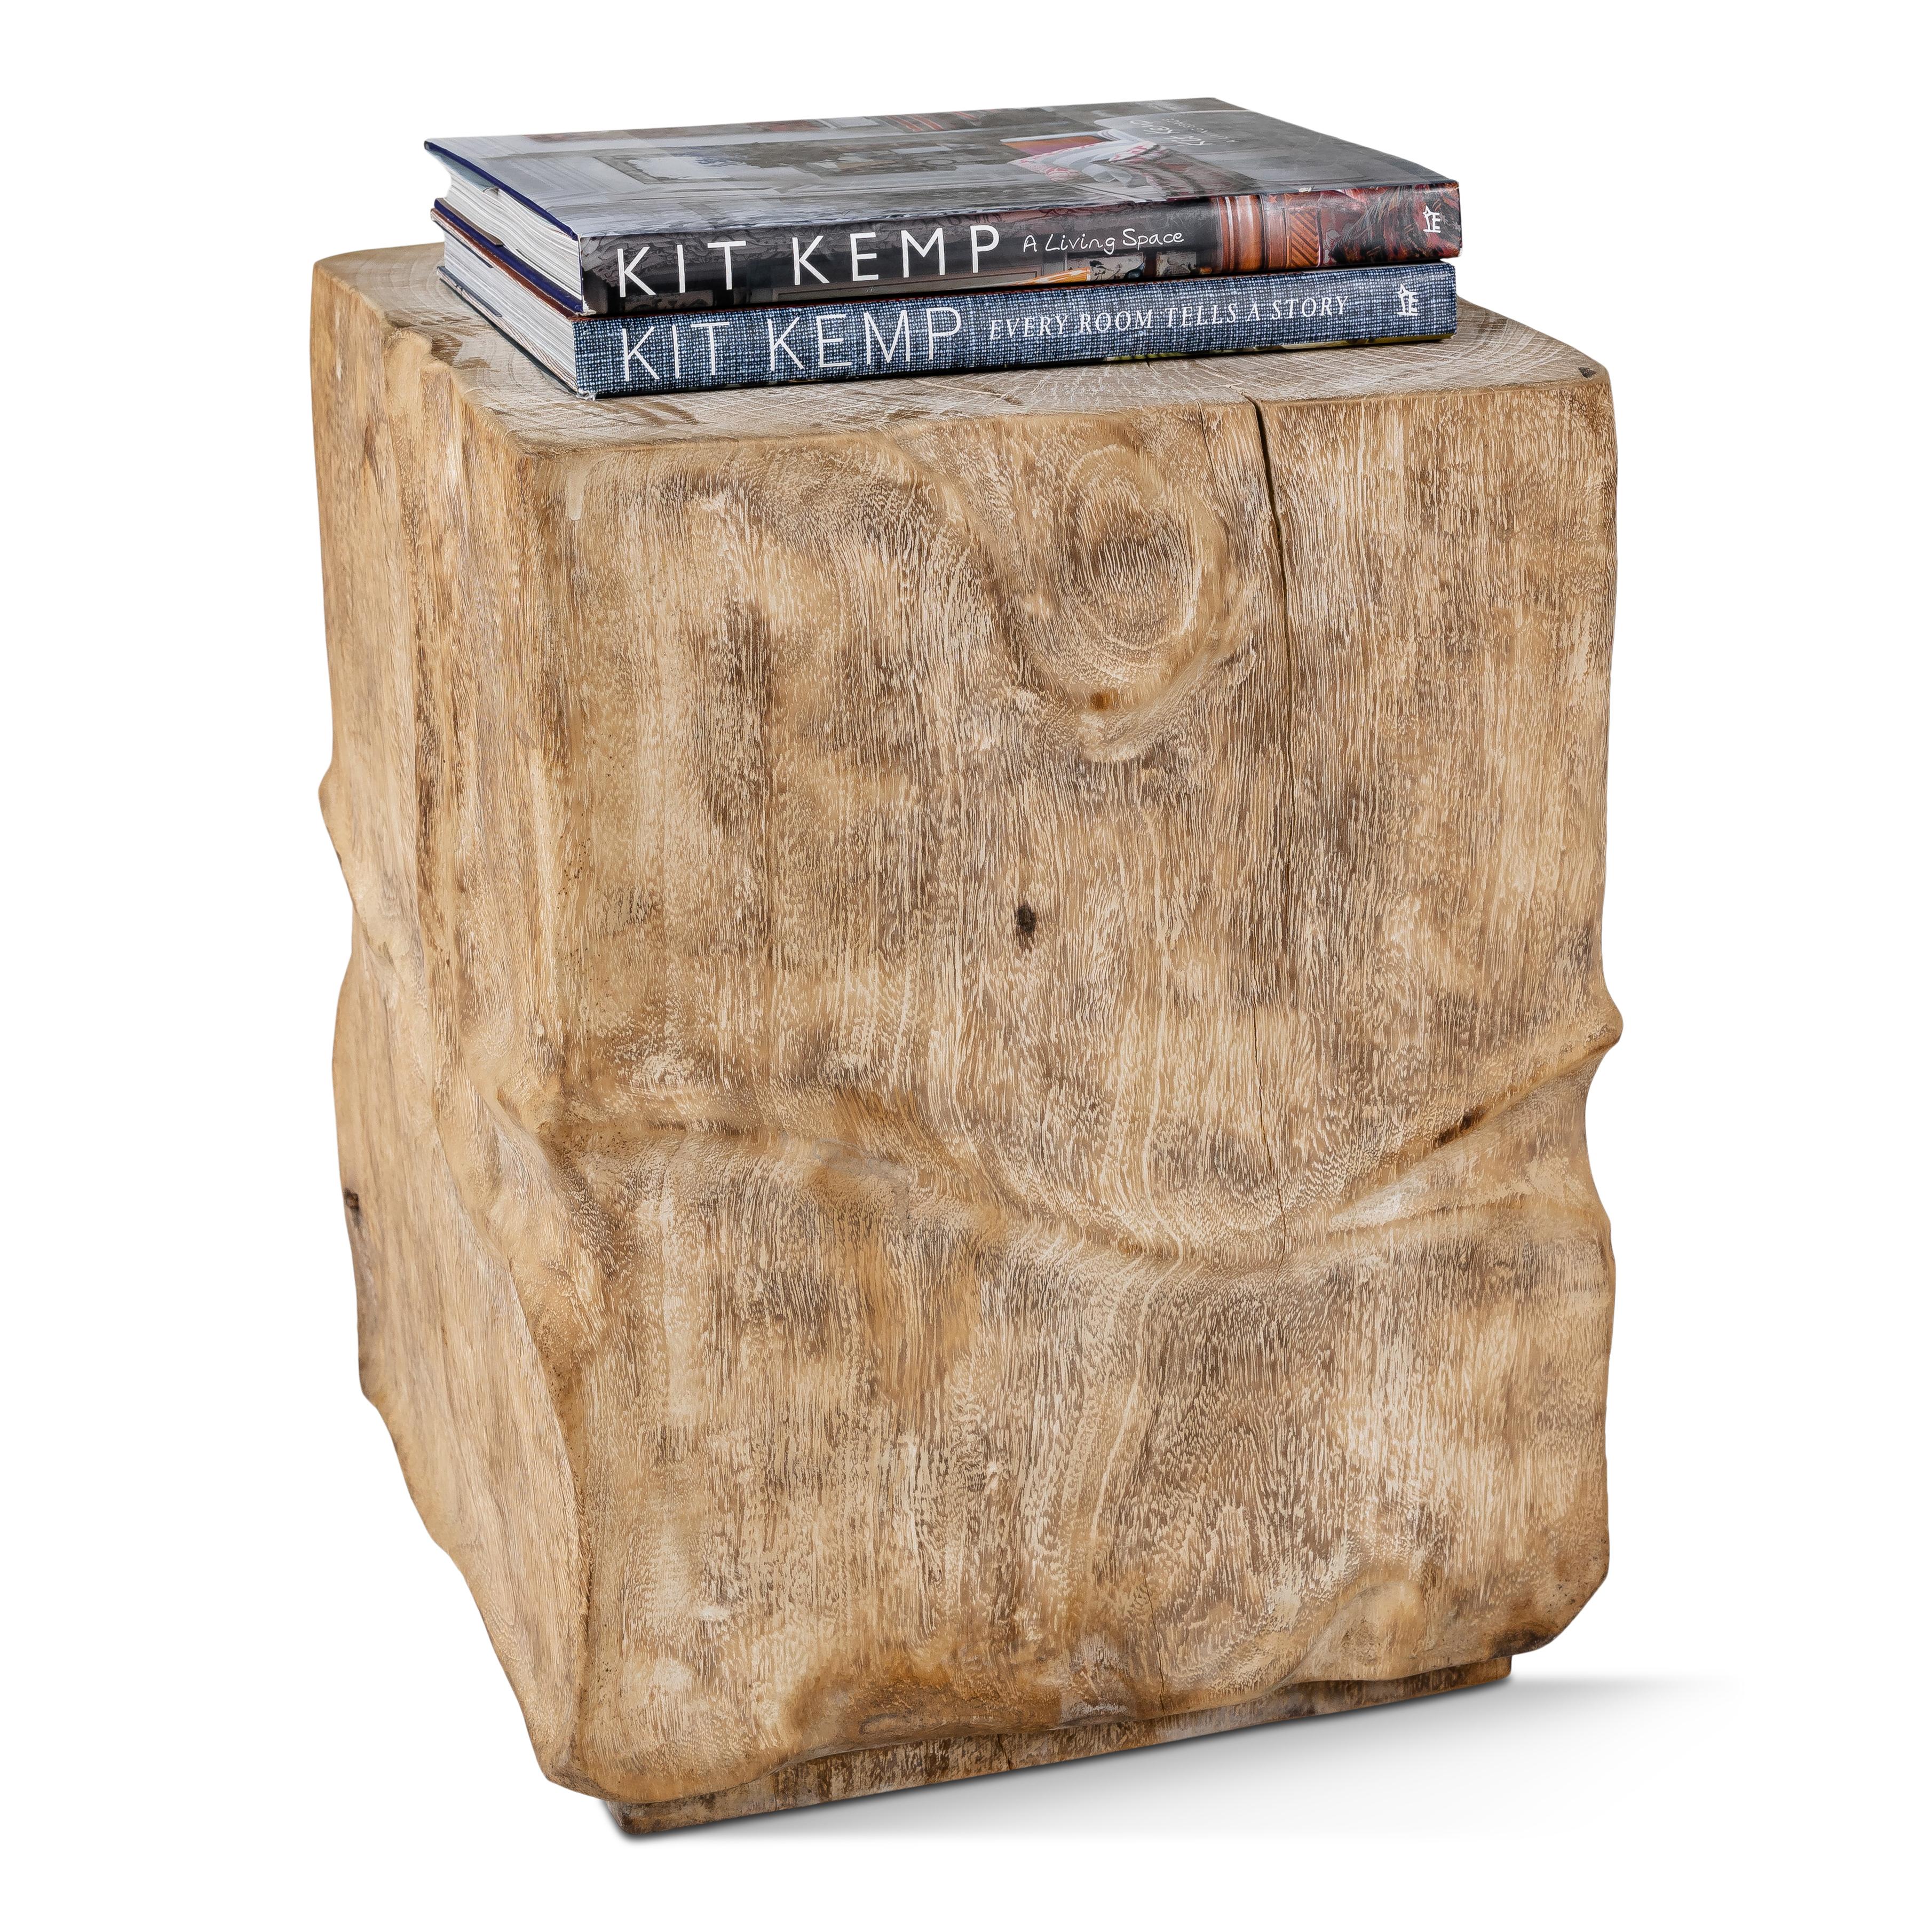 Mango wood carved accent stump end table.

Piece from our one of a kind collection, Le Monde. Exclusive to Brendan Bass.

Globally curated by Brendan Bass, Le Monde furniture and accessories offer modern sensibility, provincial construction, and